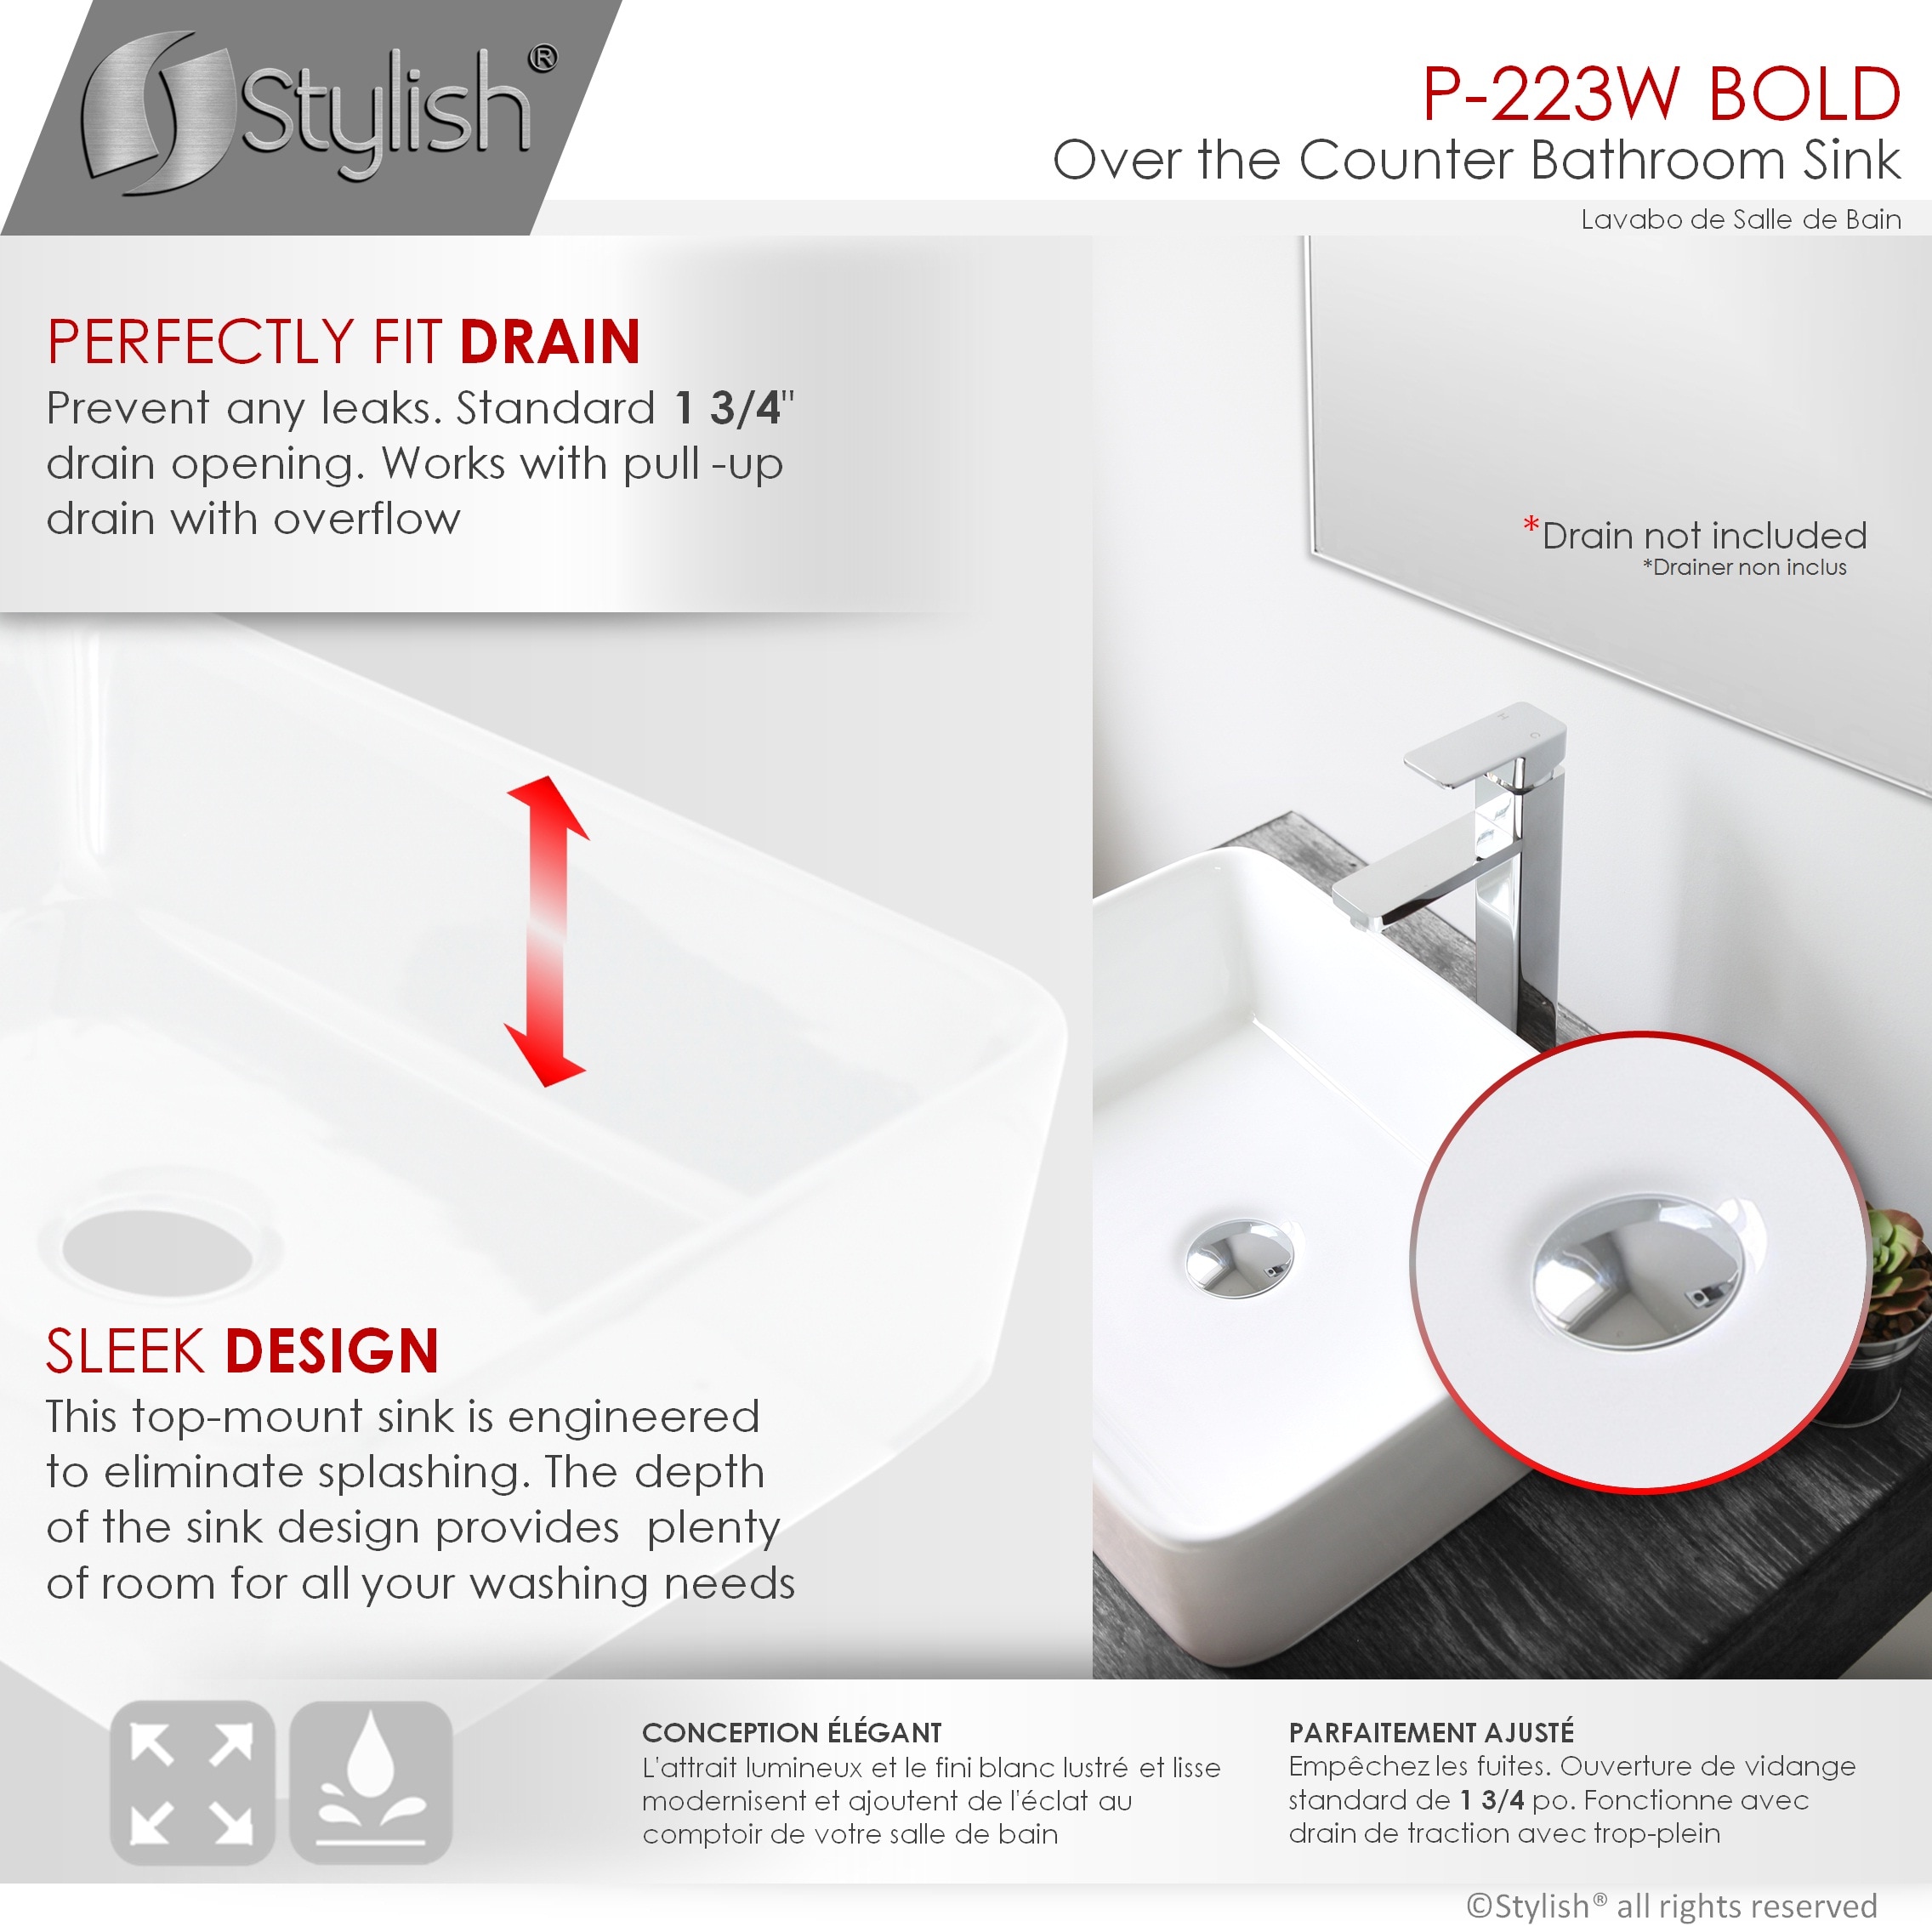 P-223 Fine Porcelain Vessel Sinks with Enamel Glaze Finish STYLISH® Rectangular Bathroom Over The Counter Sinks Smooth & Stain Resistant Surface Compliment The Bathroom Change Décor